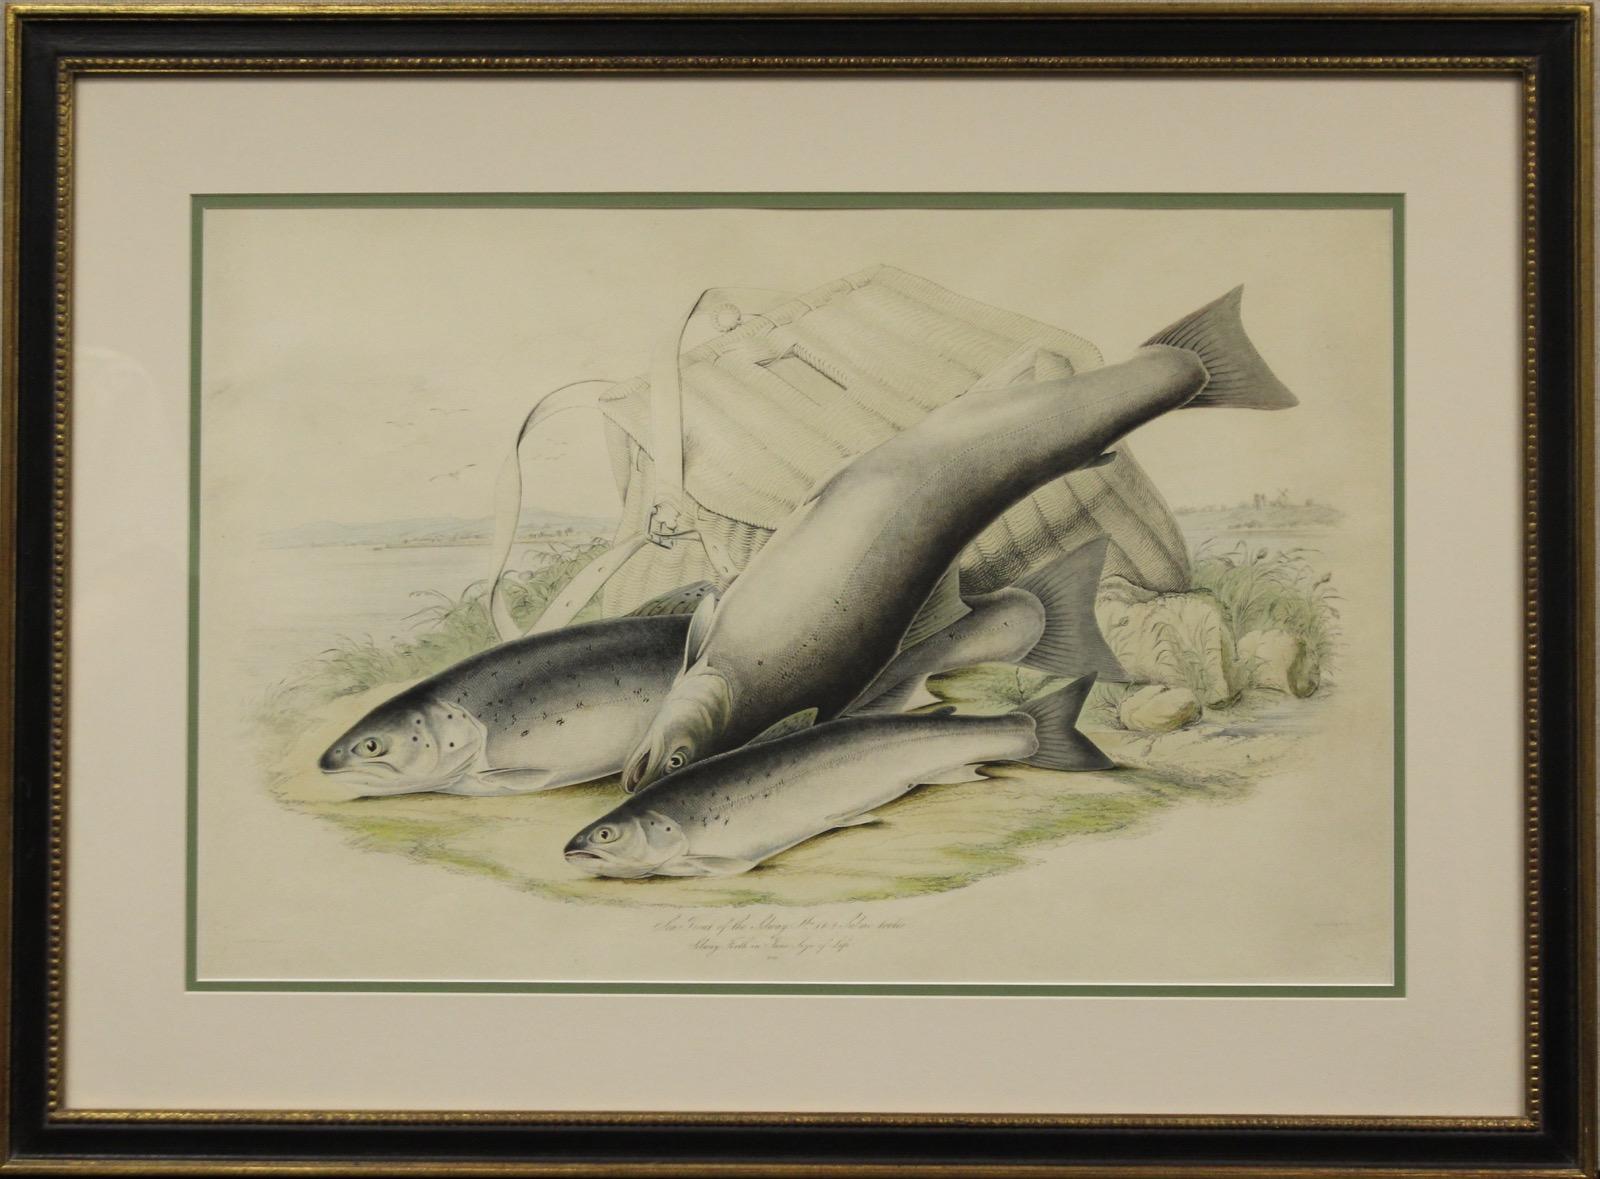 https://a.1stdibscdn.com/sir-william-jardine-prints-works-on-paper-sea-trout-of-the-solway-for-sale/a_12601/1625255220983/1_master.jpg